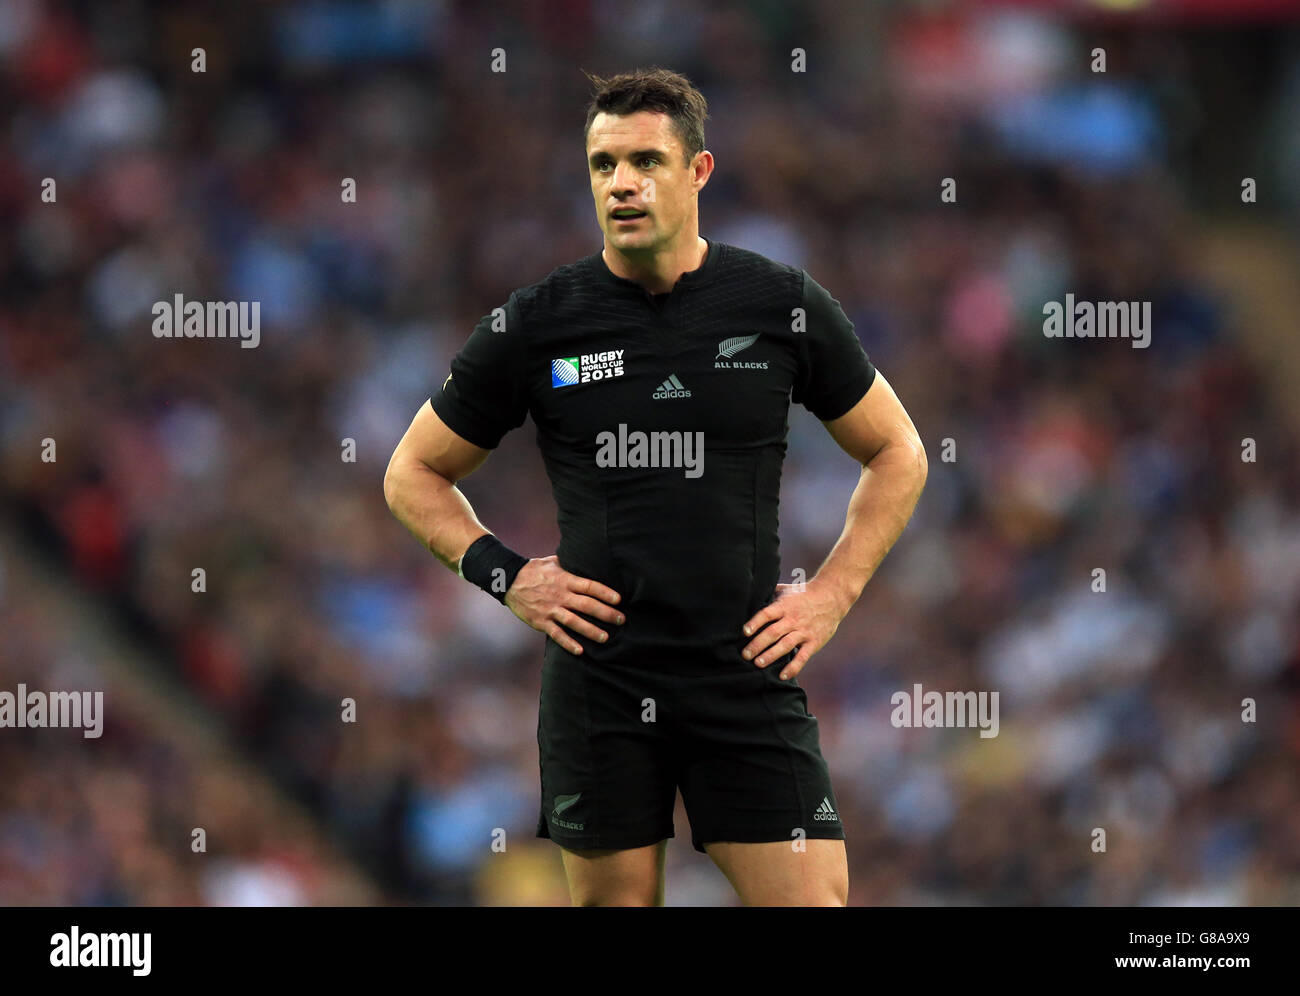 New Zealand's Dan Carter during the Rugby World Cup match at Wembley Stadium, London. PRESS ASSOCIATION Photo. Picture date: Sunday September 20, 2015. See PA story RUGBYU New Zealand. Photo credit should read: Mike Egerton/PA Wire. Stock Photo